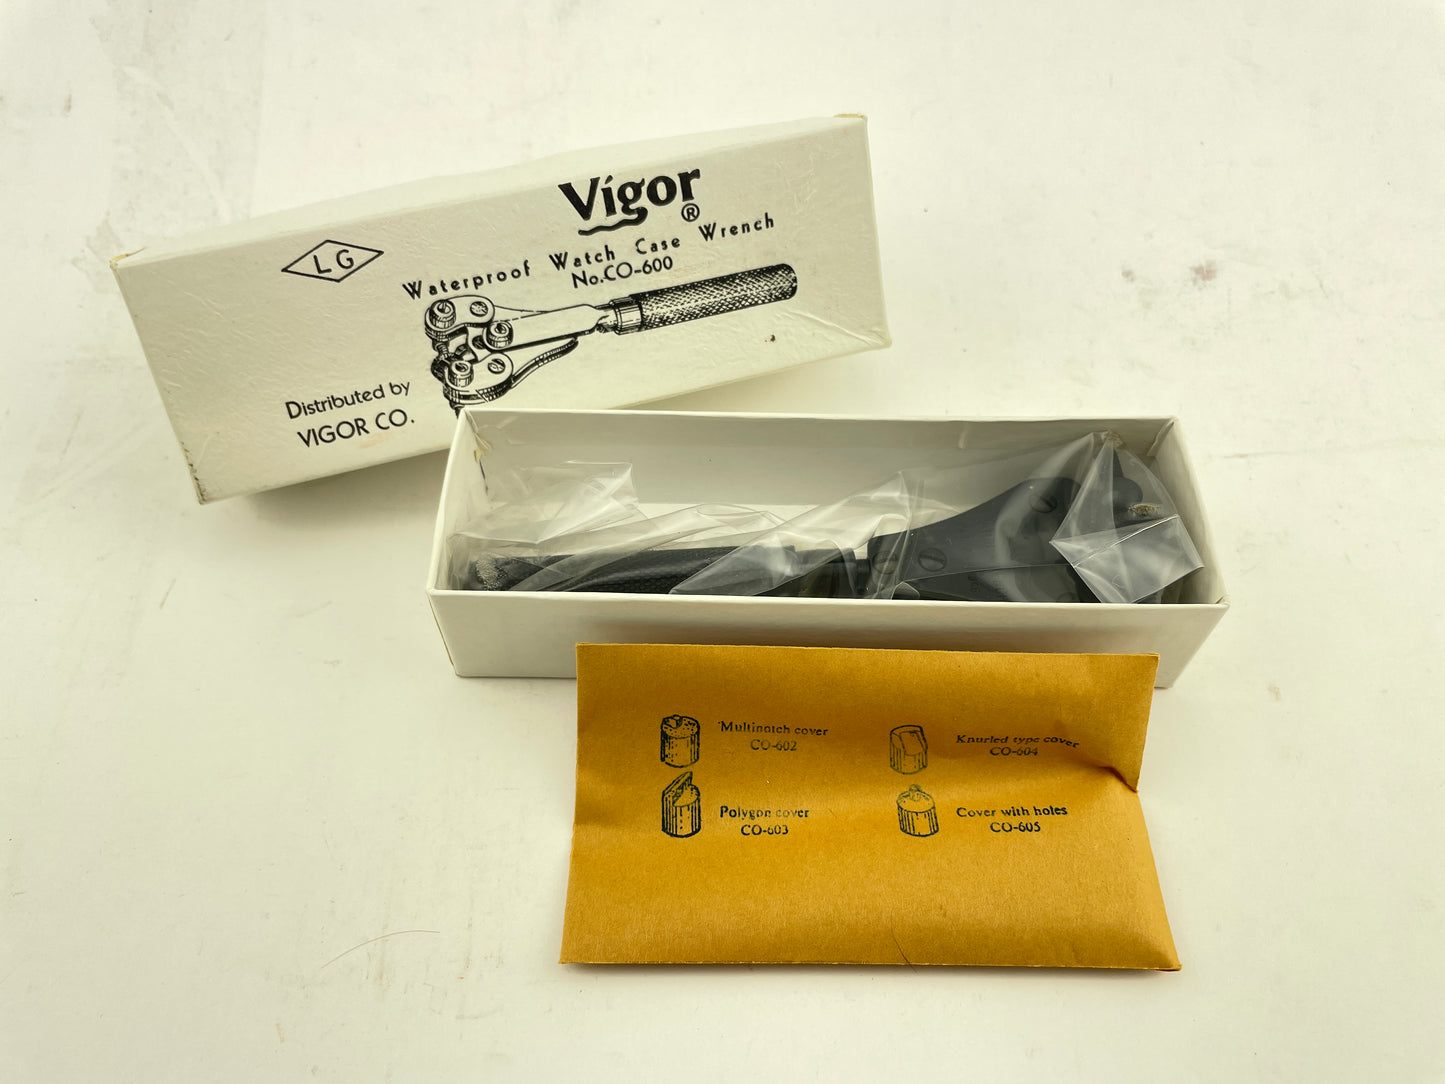 Vigor Boxed No. CO-600 Waterproof Case Wrench